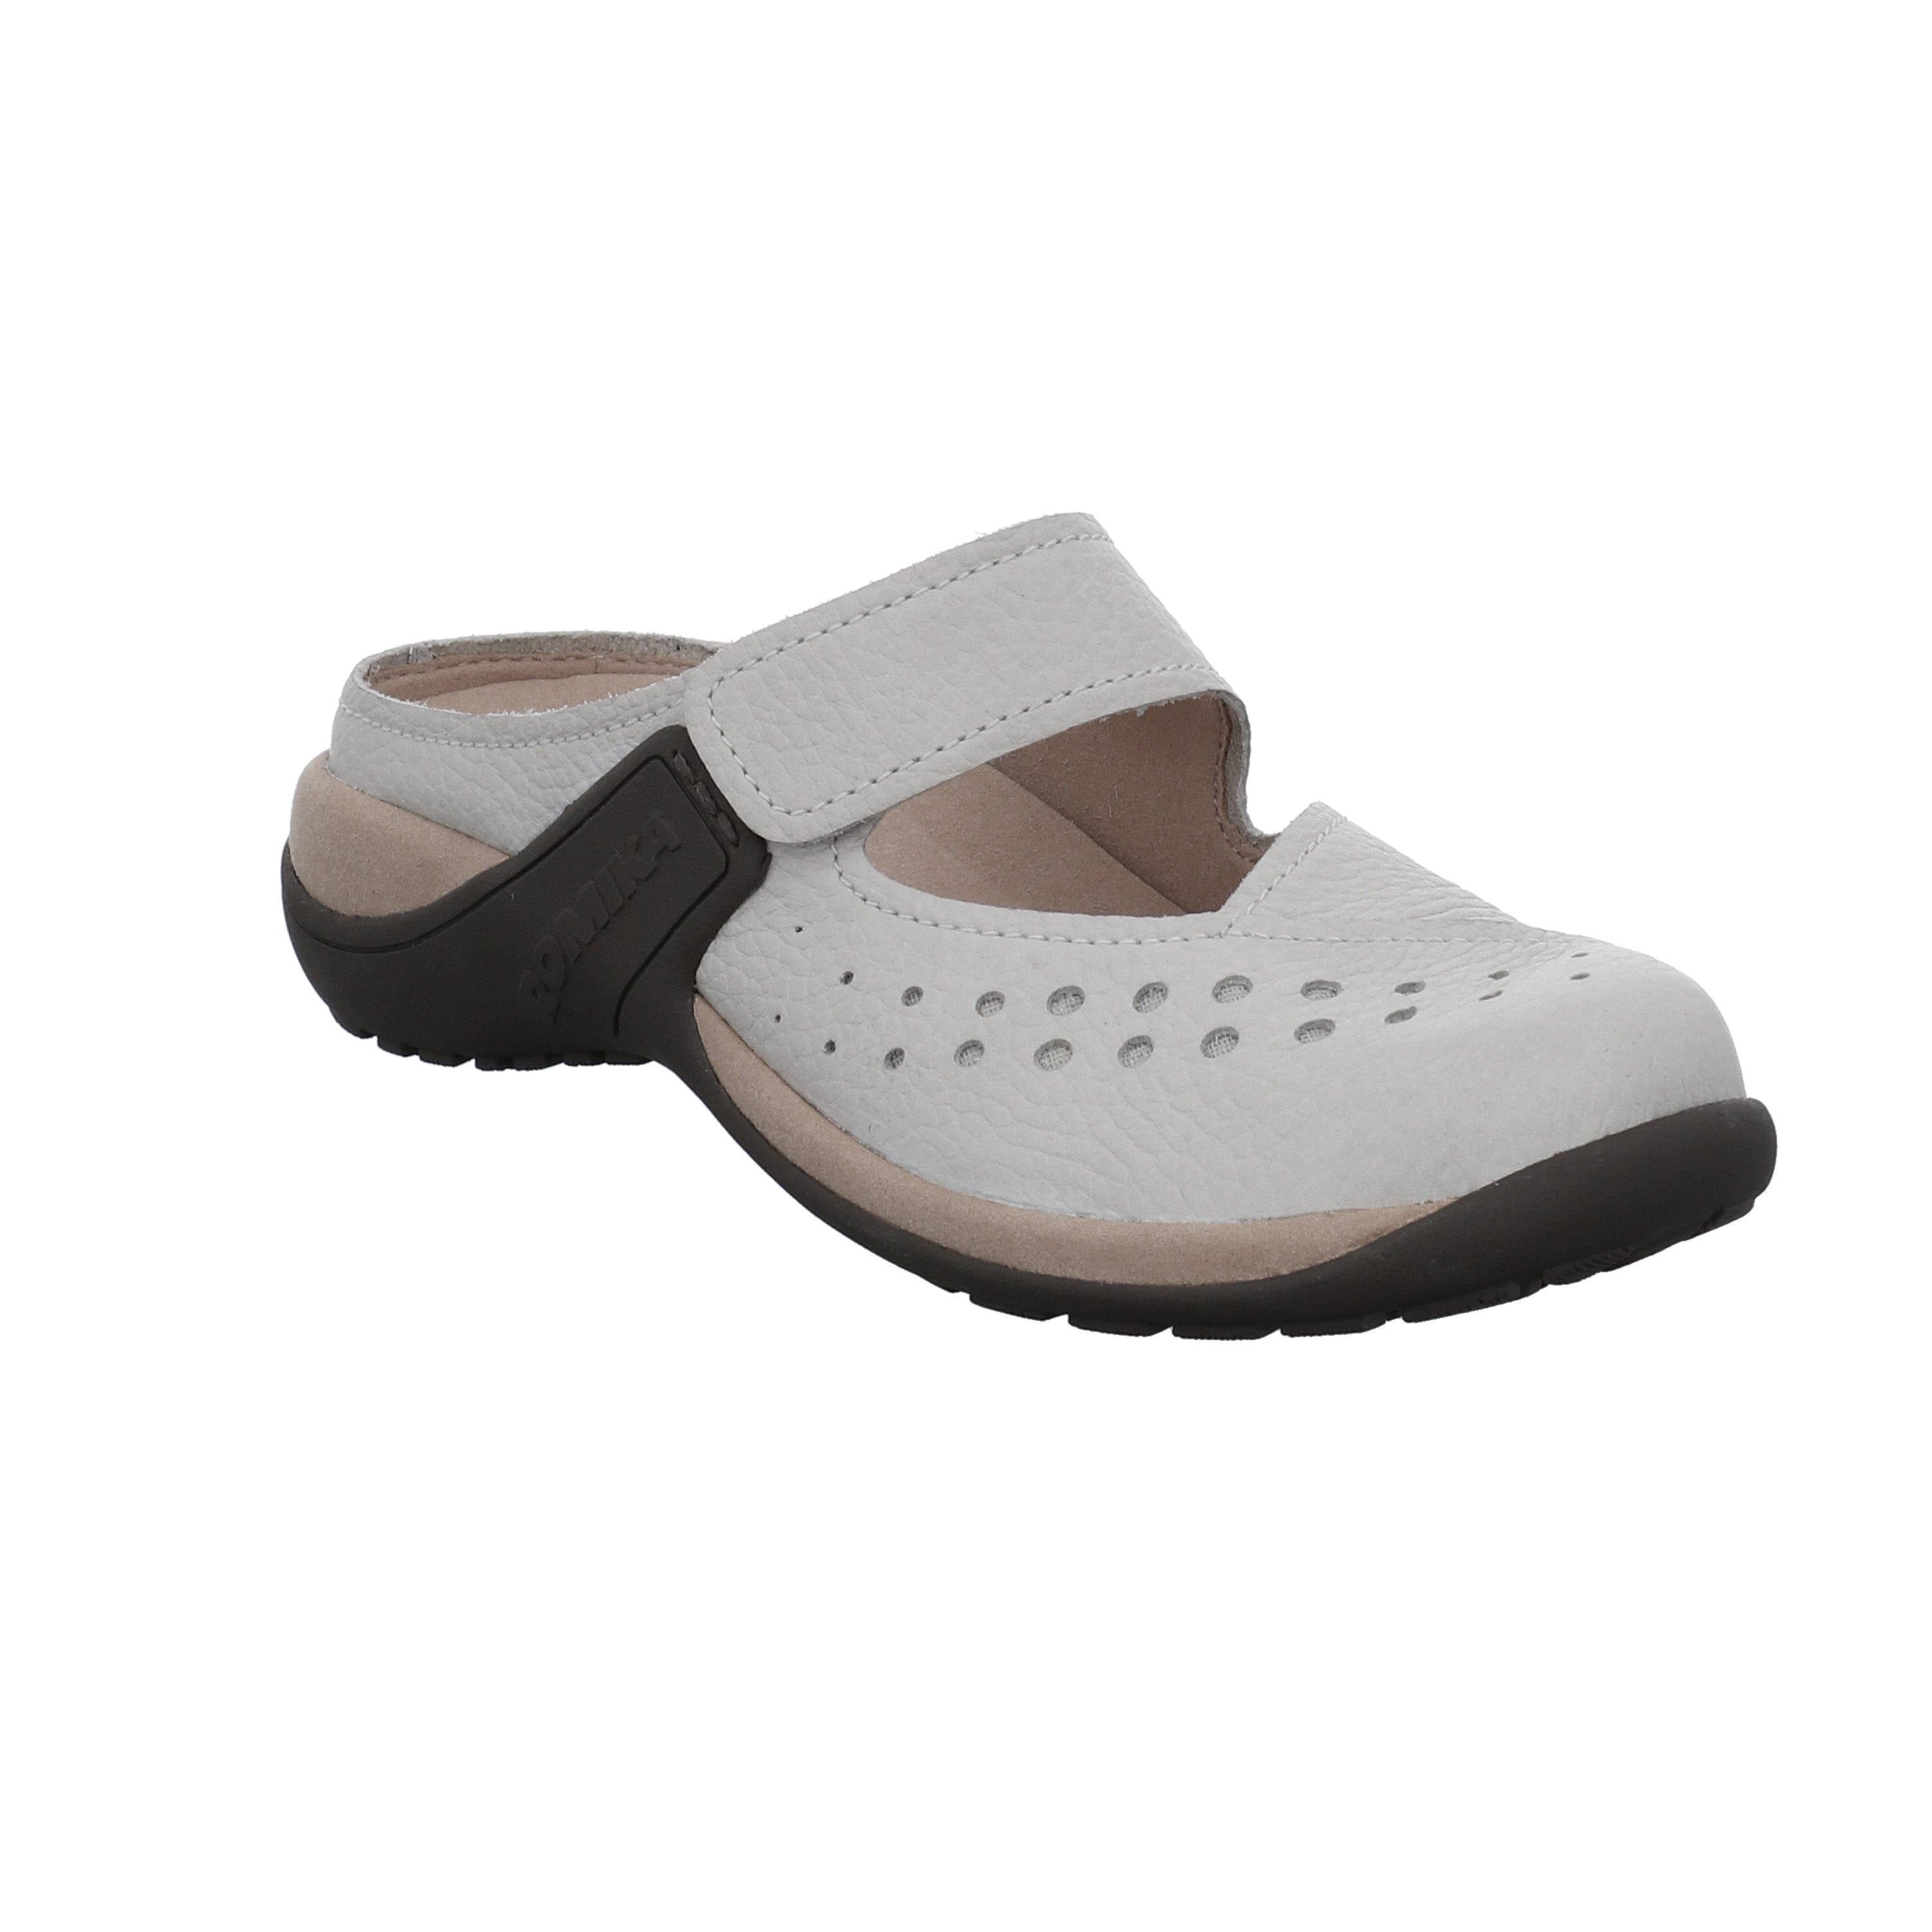 Clog style MILLA 131 by Romika USA